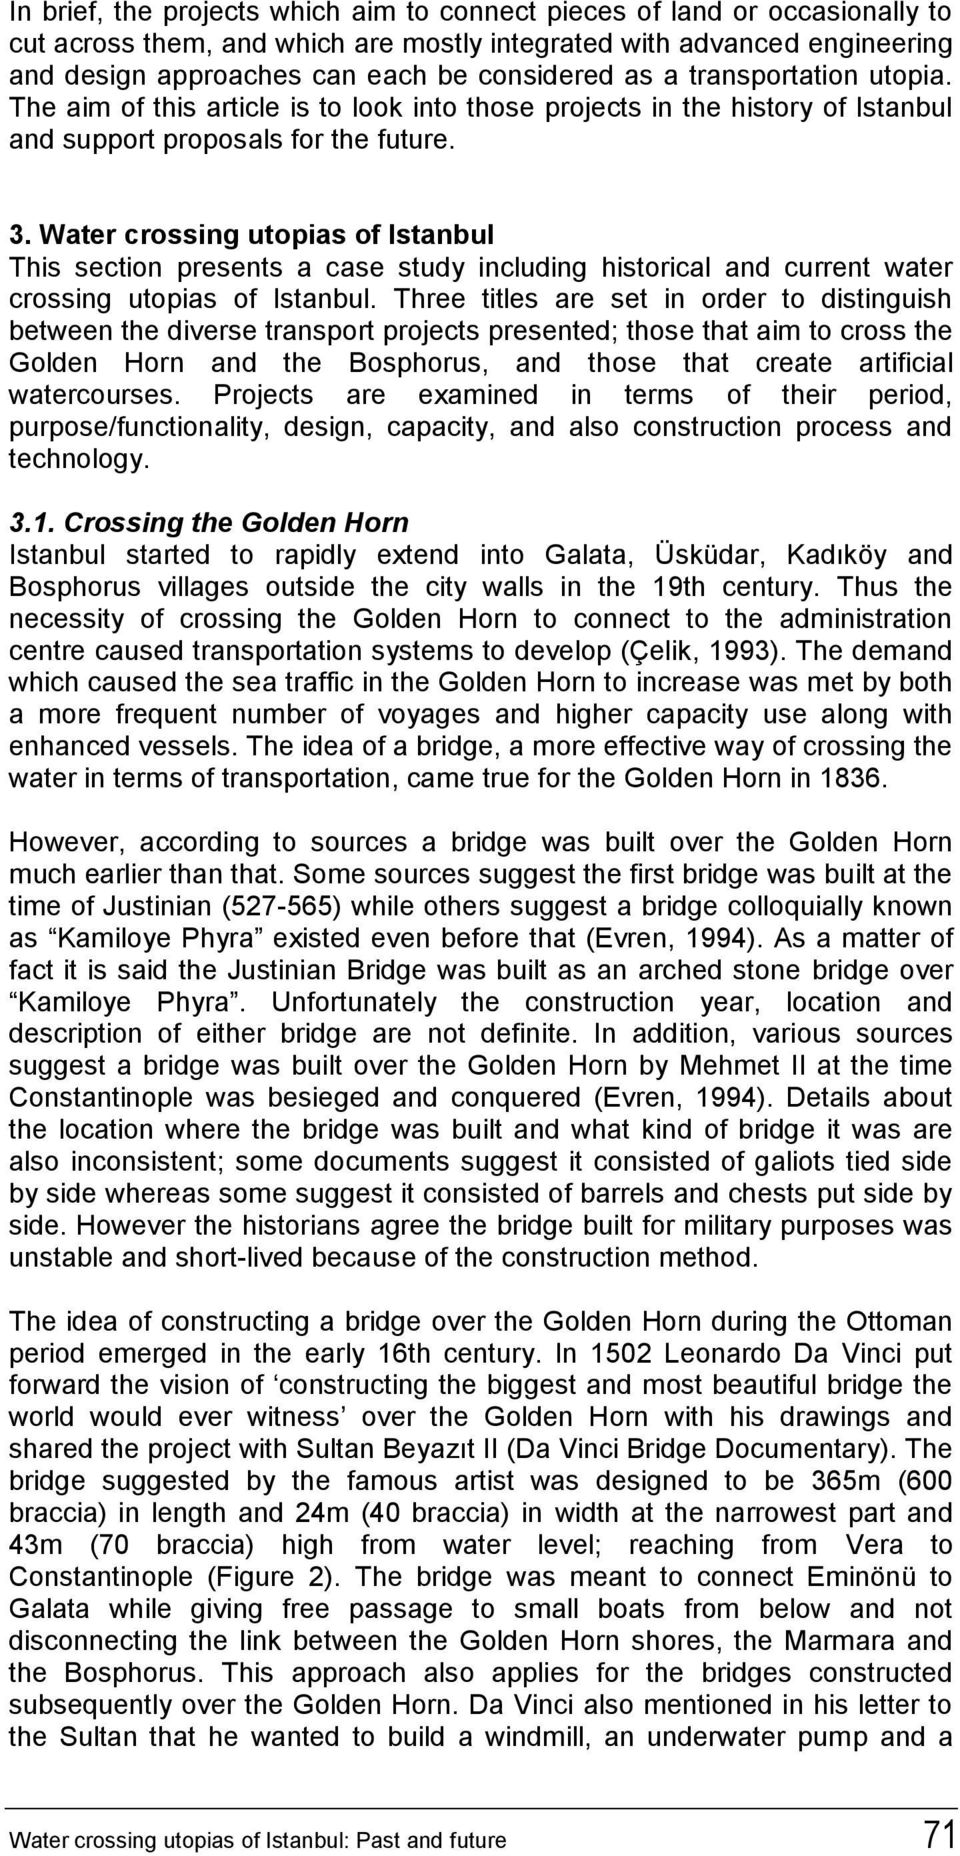 Water crossing utopias of Istanbul This section presents a case study including historical and current water crossing utopias of Istanbul.